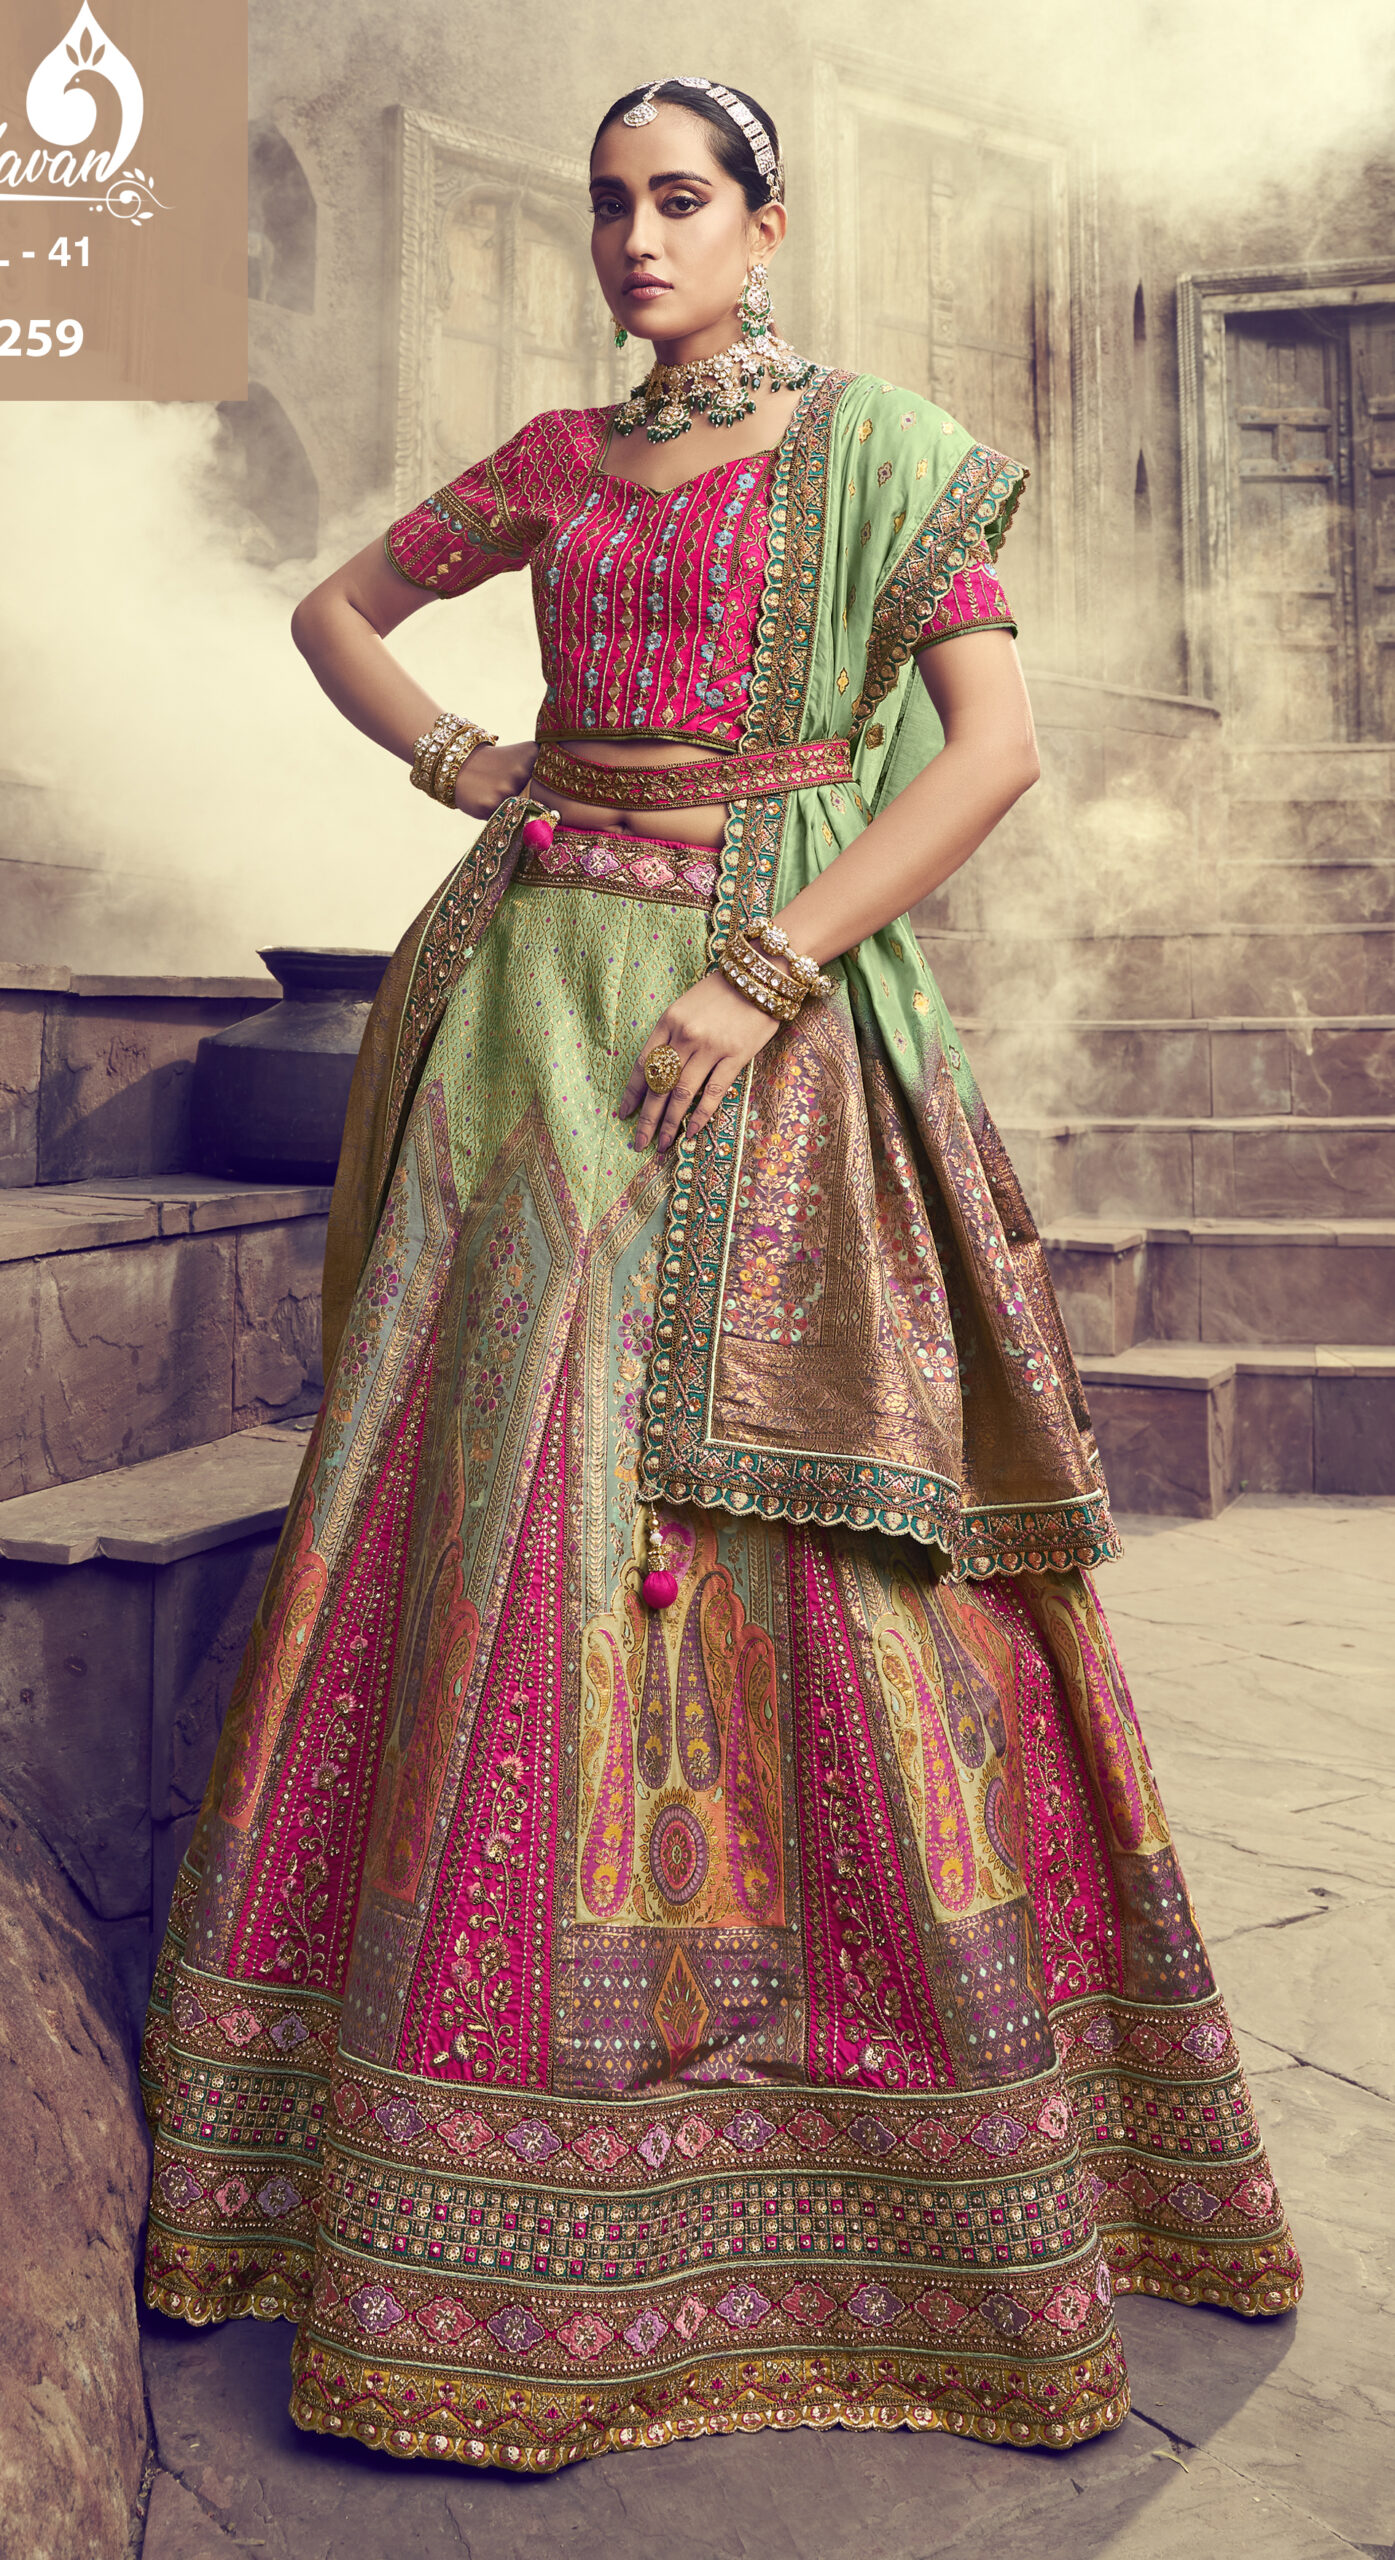 Gajri Red Colored Silk Lehenga Choli | Get The Best Of Ethnic Wear Now At  Your Doorstep. Shop From Our Wide Collection of Lehenga, Partywear And  Sarees, Salwar Suits, Kurti and Much